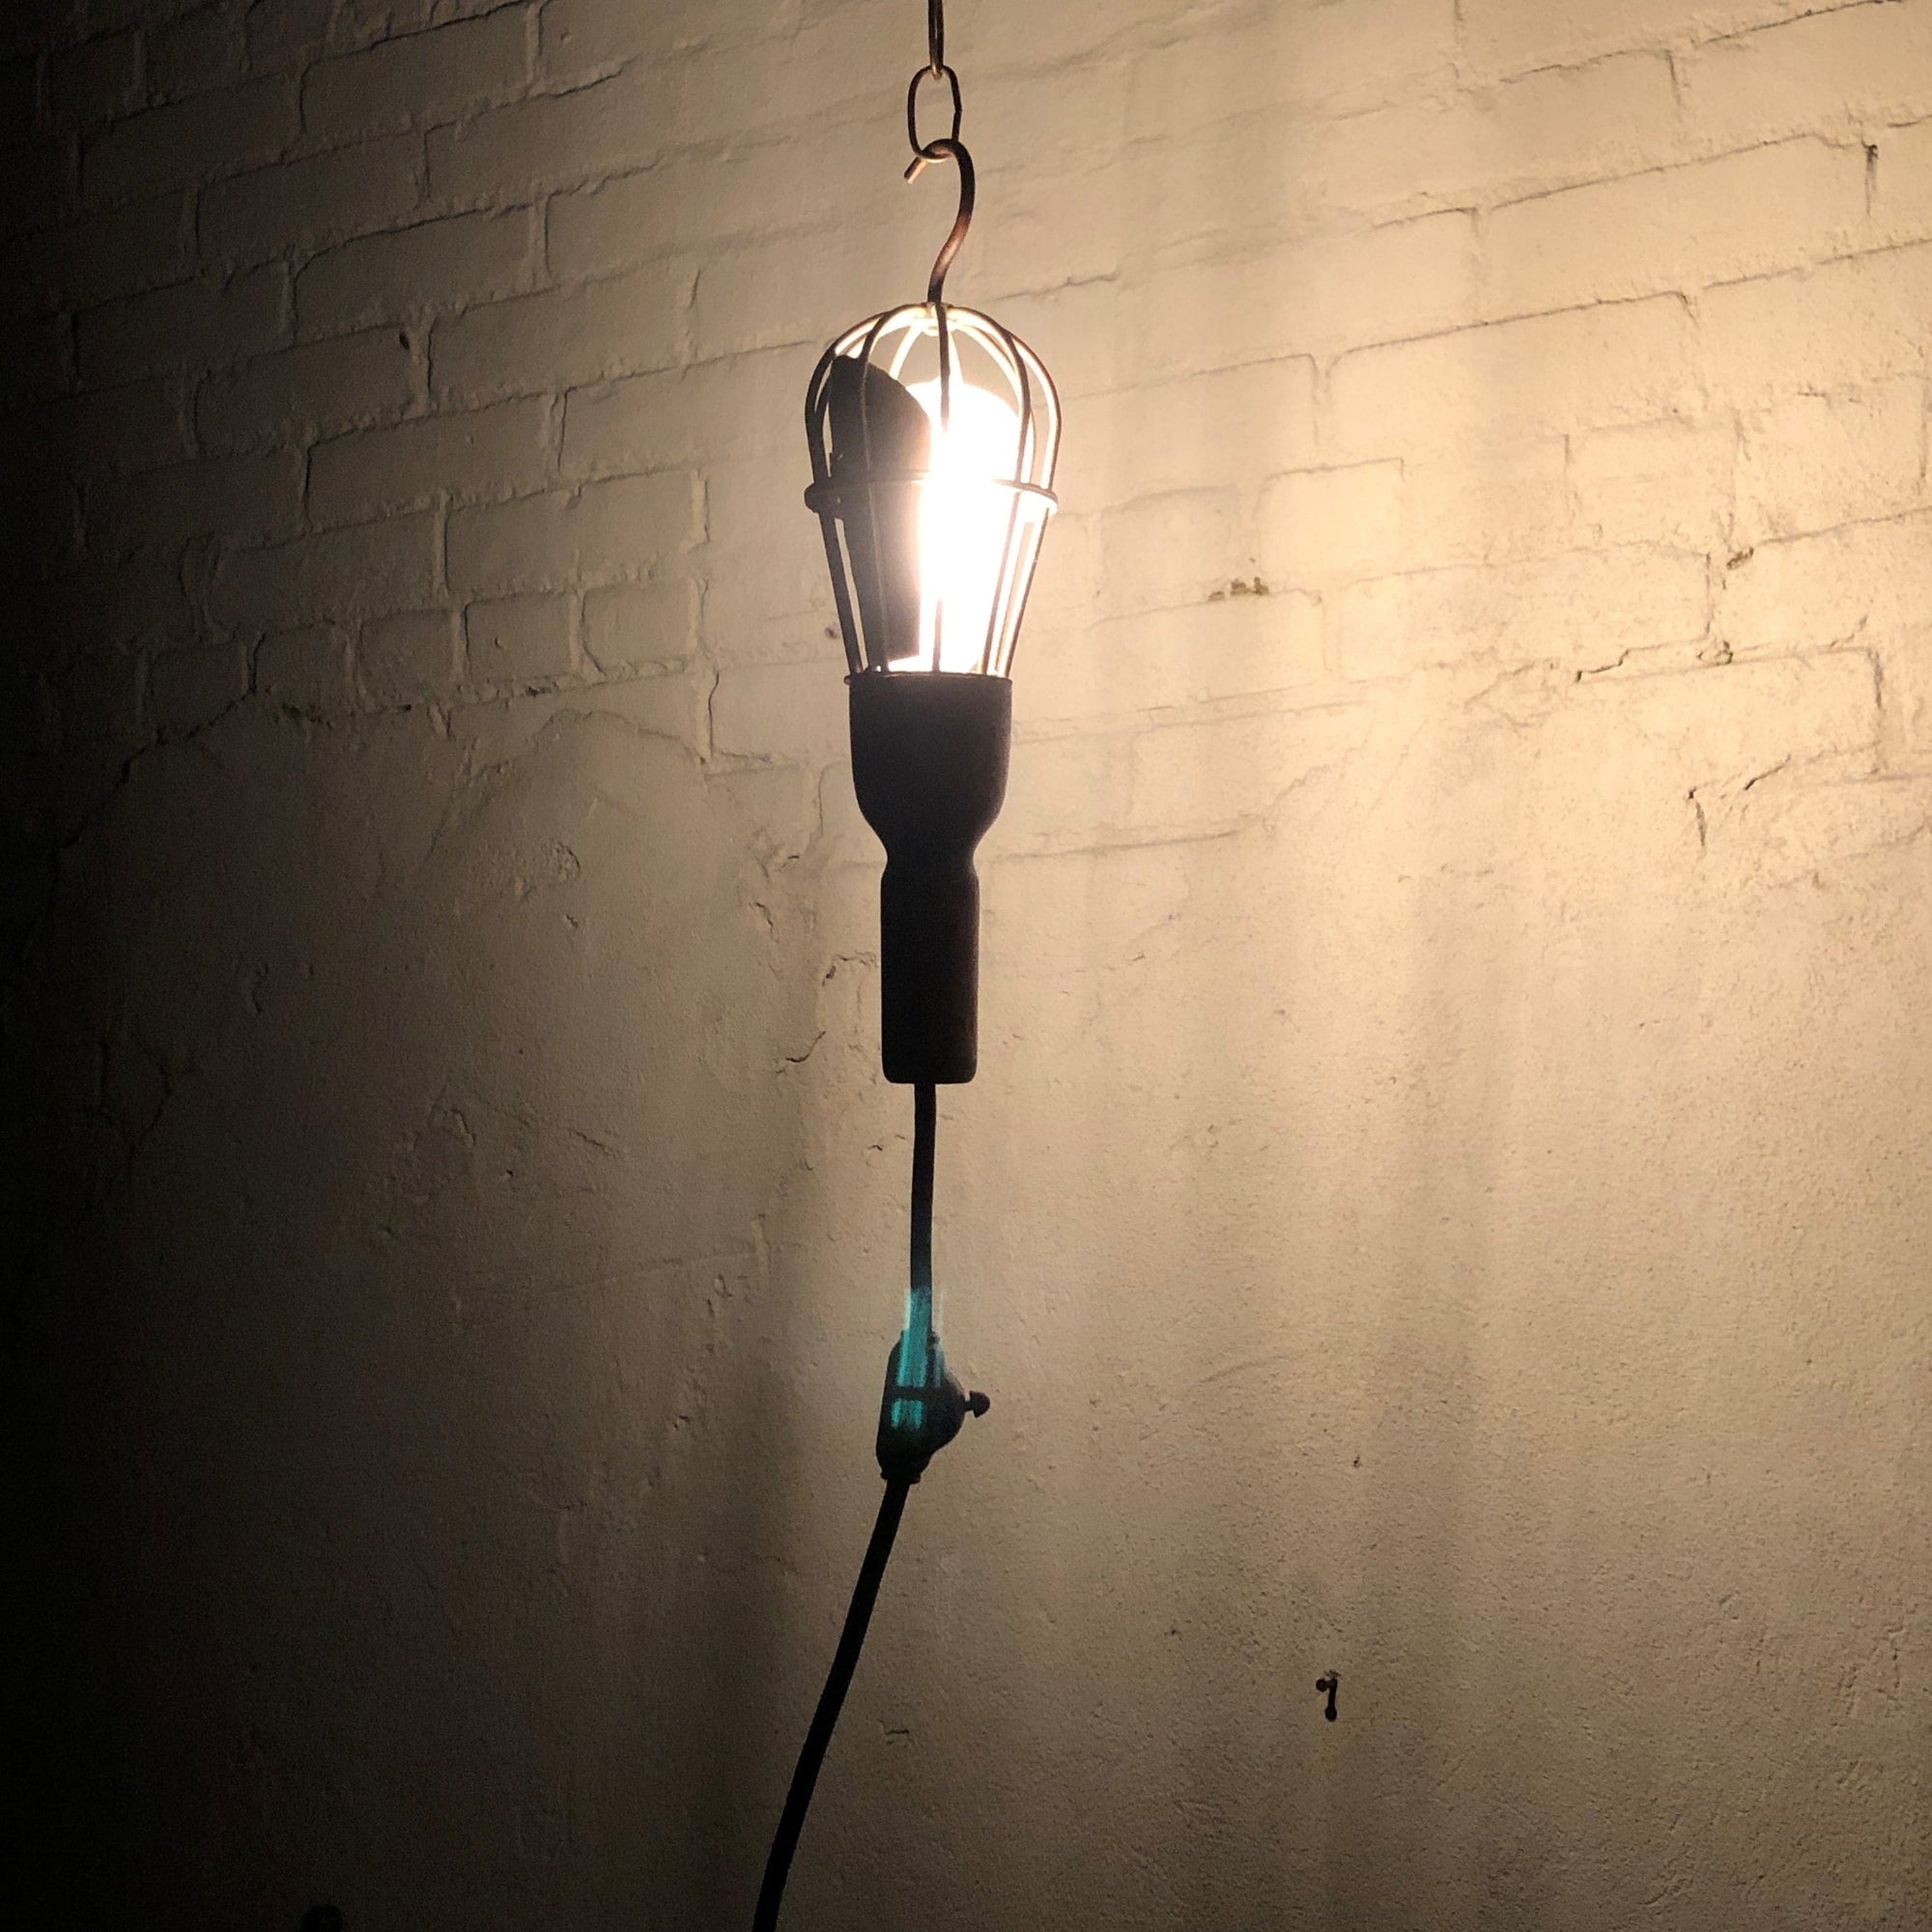 I Like Mike's Mid Century Modern pendant light Antique Hanging Trouble Light, Industrial Chic Work Light